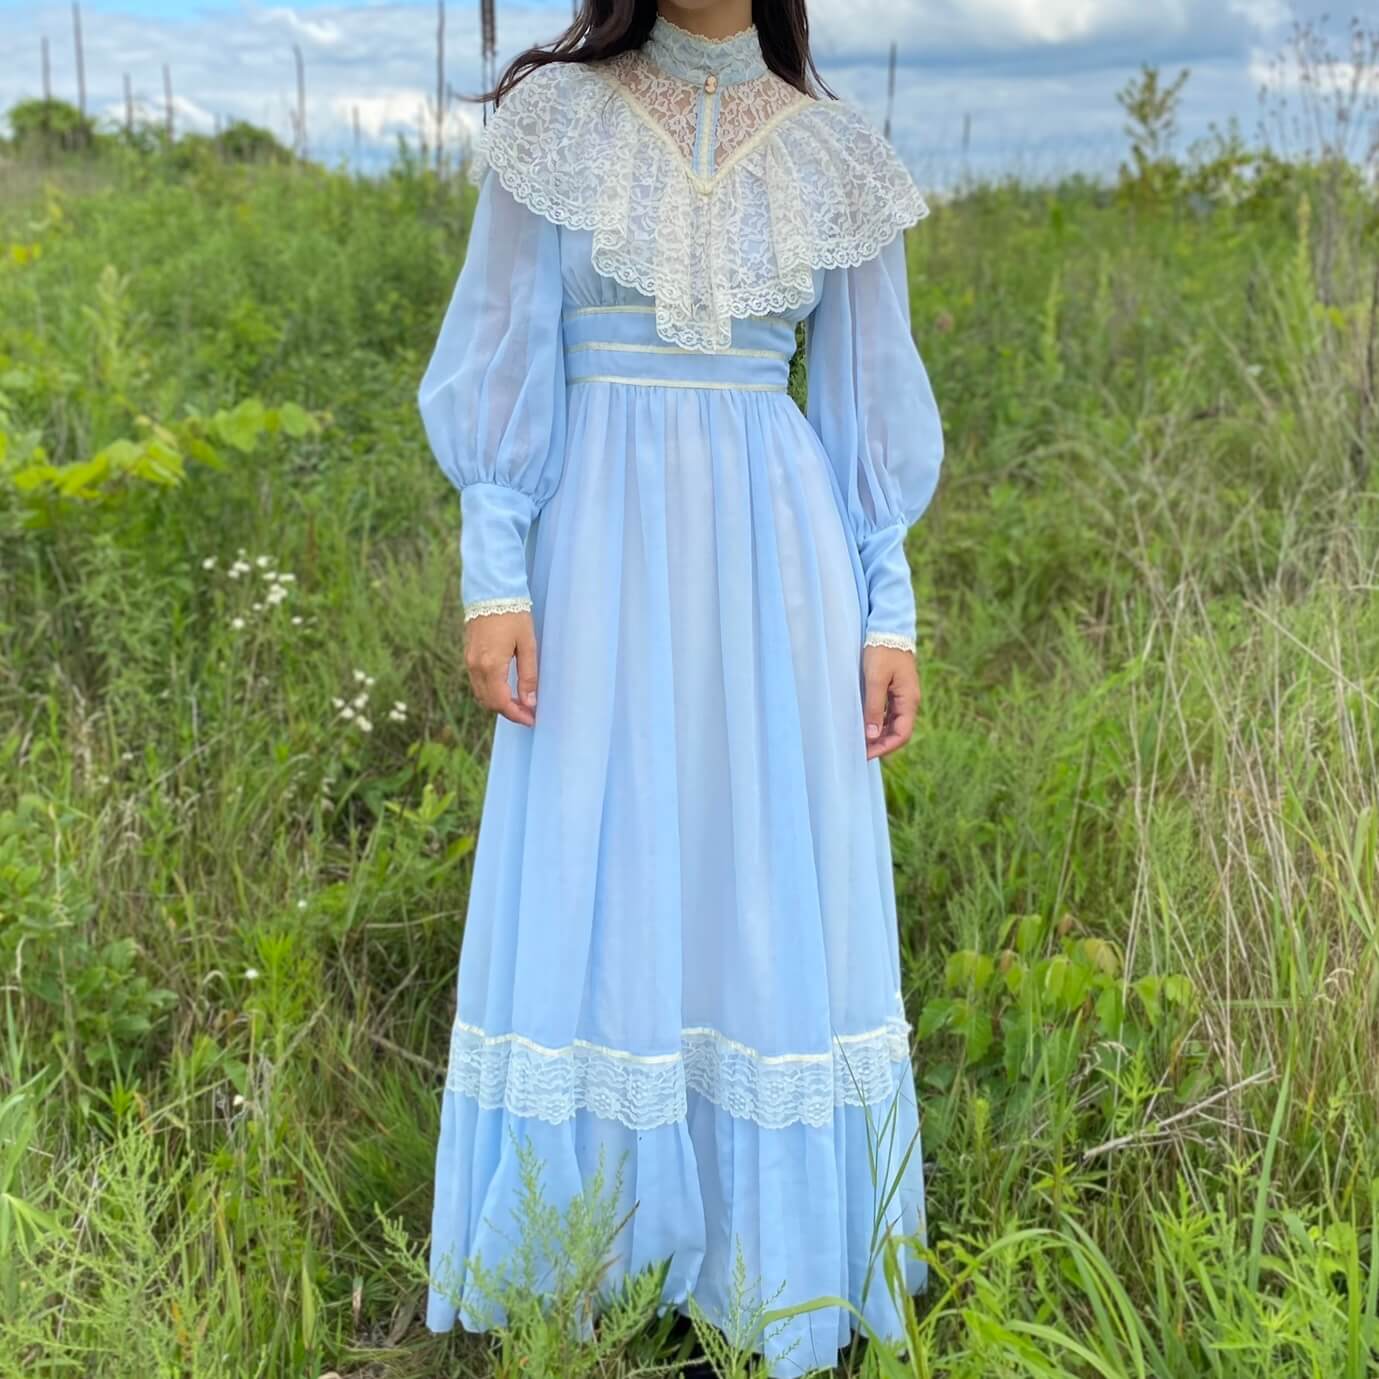 Vintage blue prairie dress with lace collar on a model in a green field